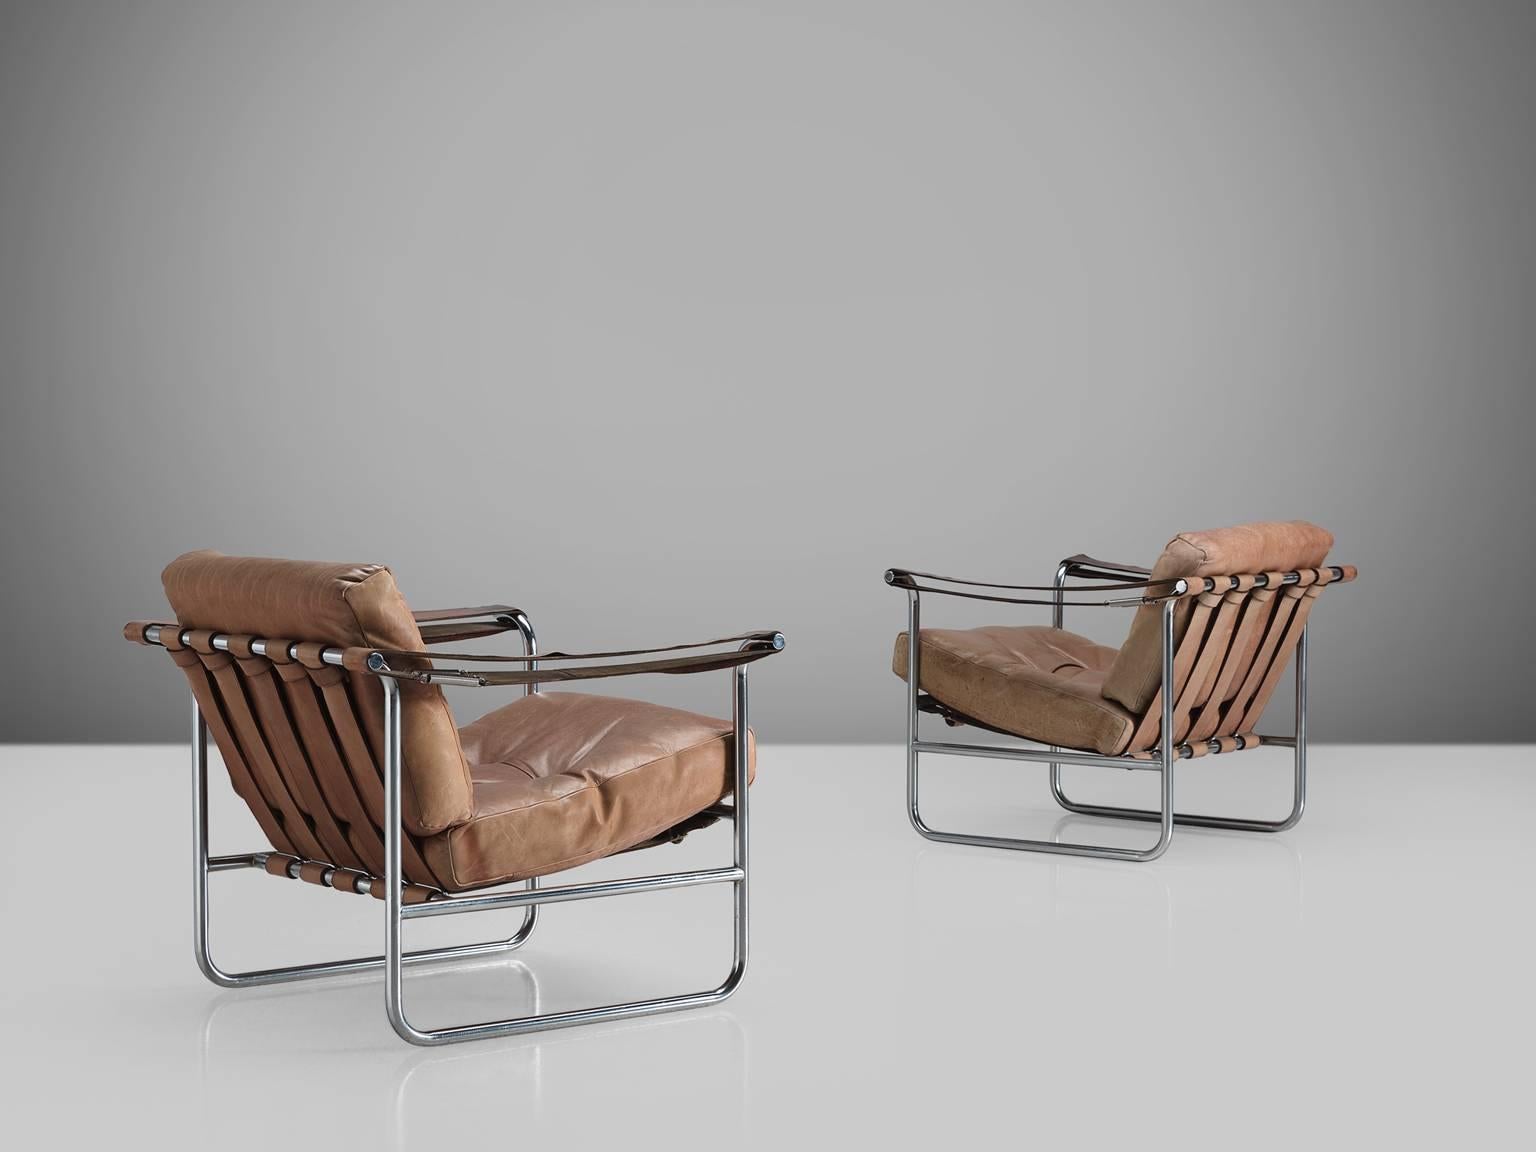 Hans Eichenberger for De Sede, set of armchairs HE 113, beige to cognac leather, tubular steel, Switzerland, 1956.

This set of Swiss armchairs features a tubular frame with a thick comfortable seat and back cushion. The back of the chairs is